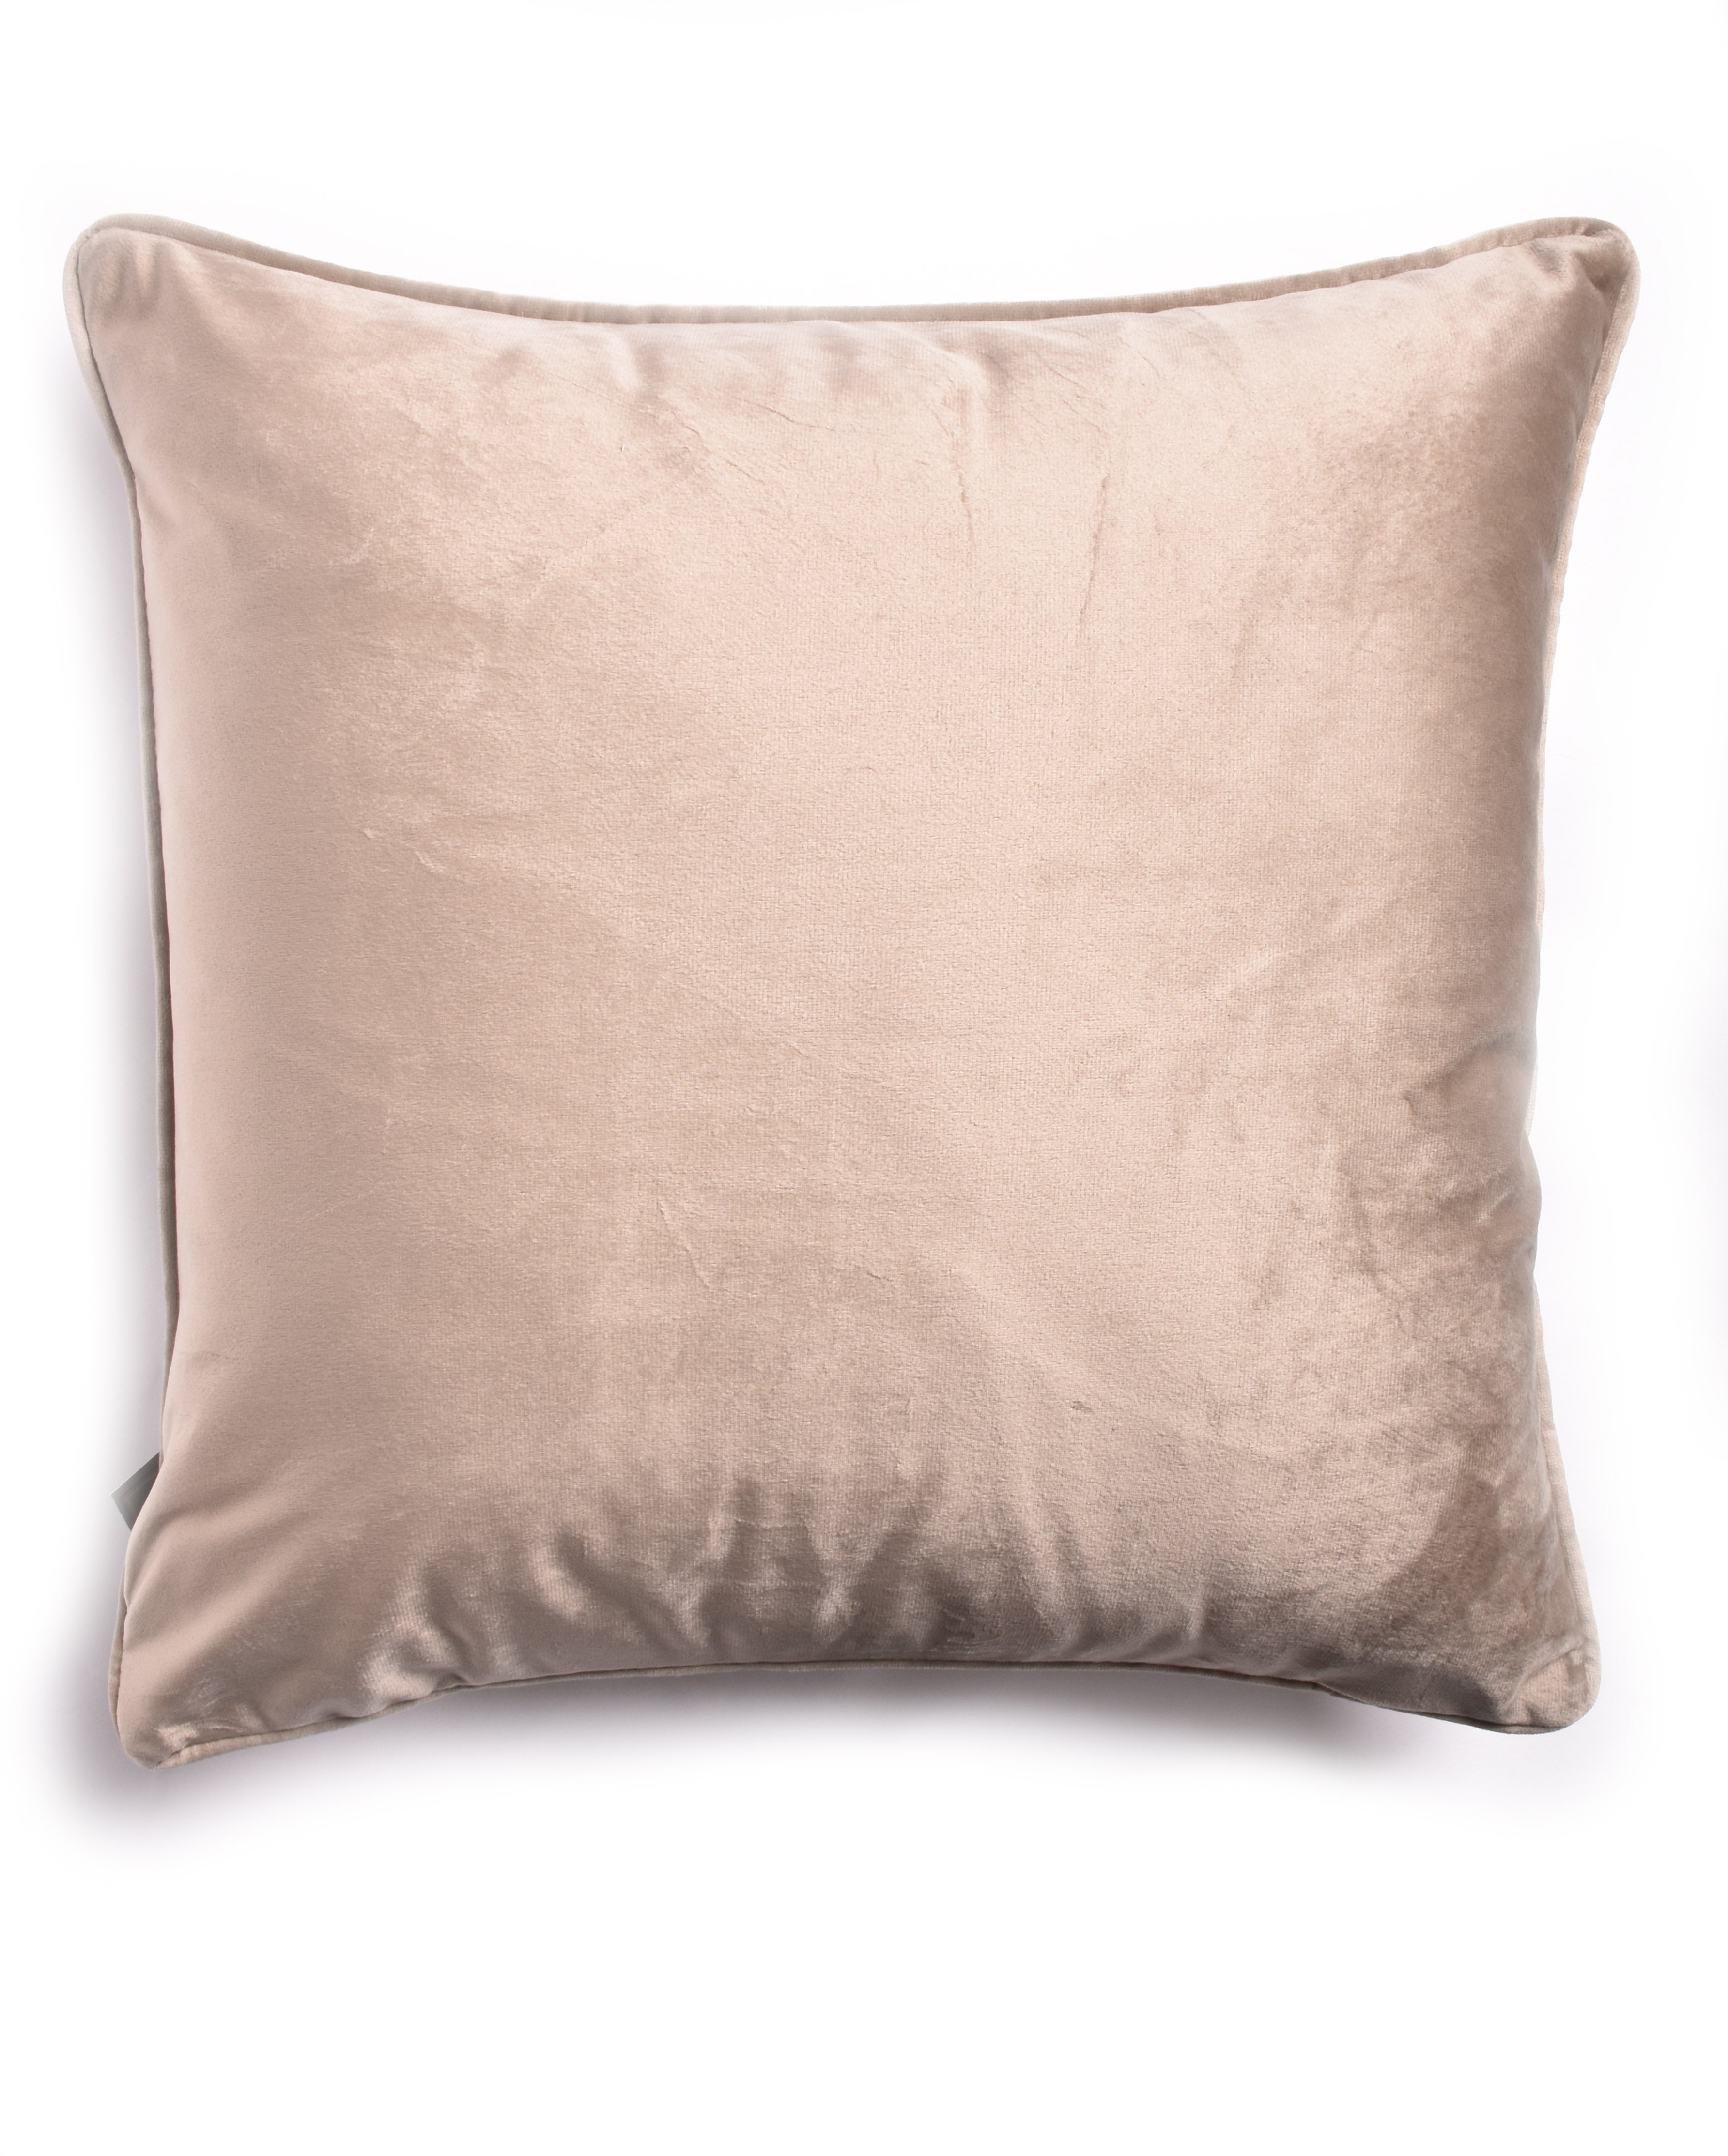 French Velvet Piped Cushion Cover 55 x 55cm - Mink - TJ Hughes Natural